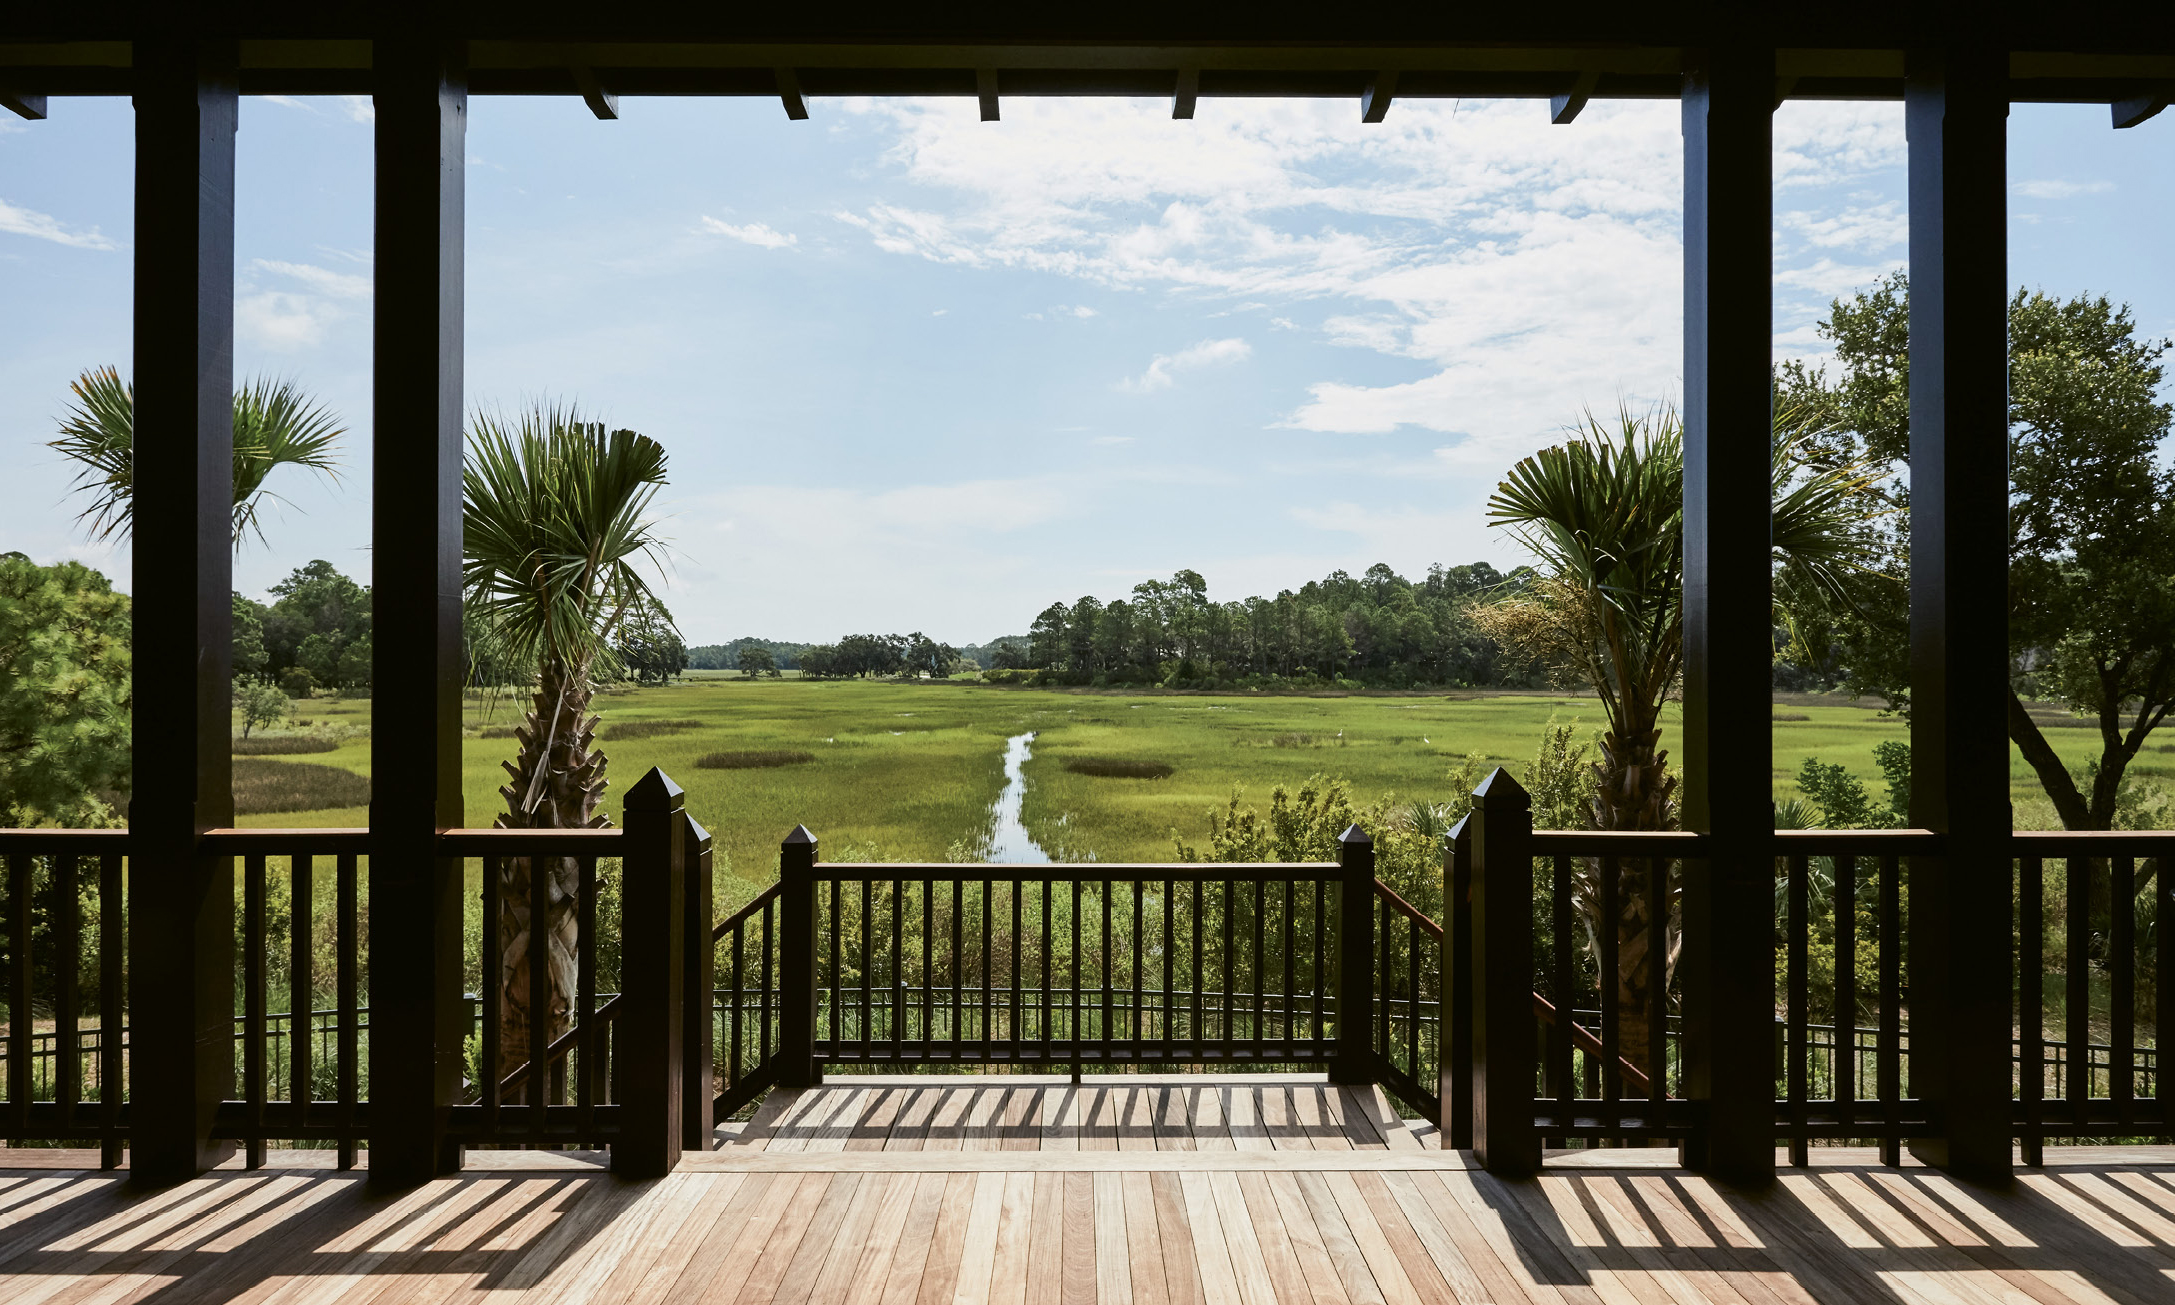 “I understood why the homeowners didn’t want any striking colors. It is so peaceful looking out onto the marsh, you don’t want anything inside distracting from that serenity.”  —Charlotte Lucas, interior designer